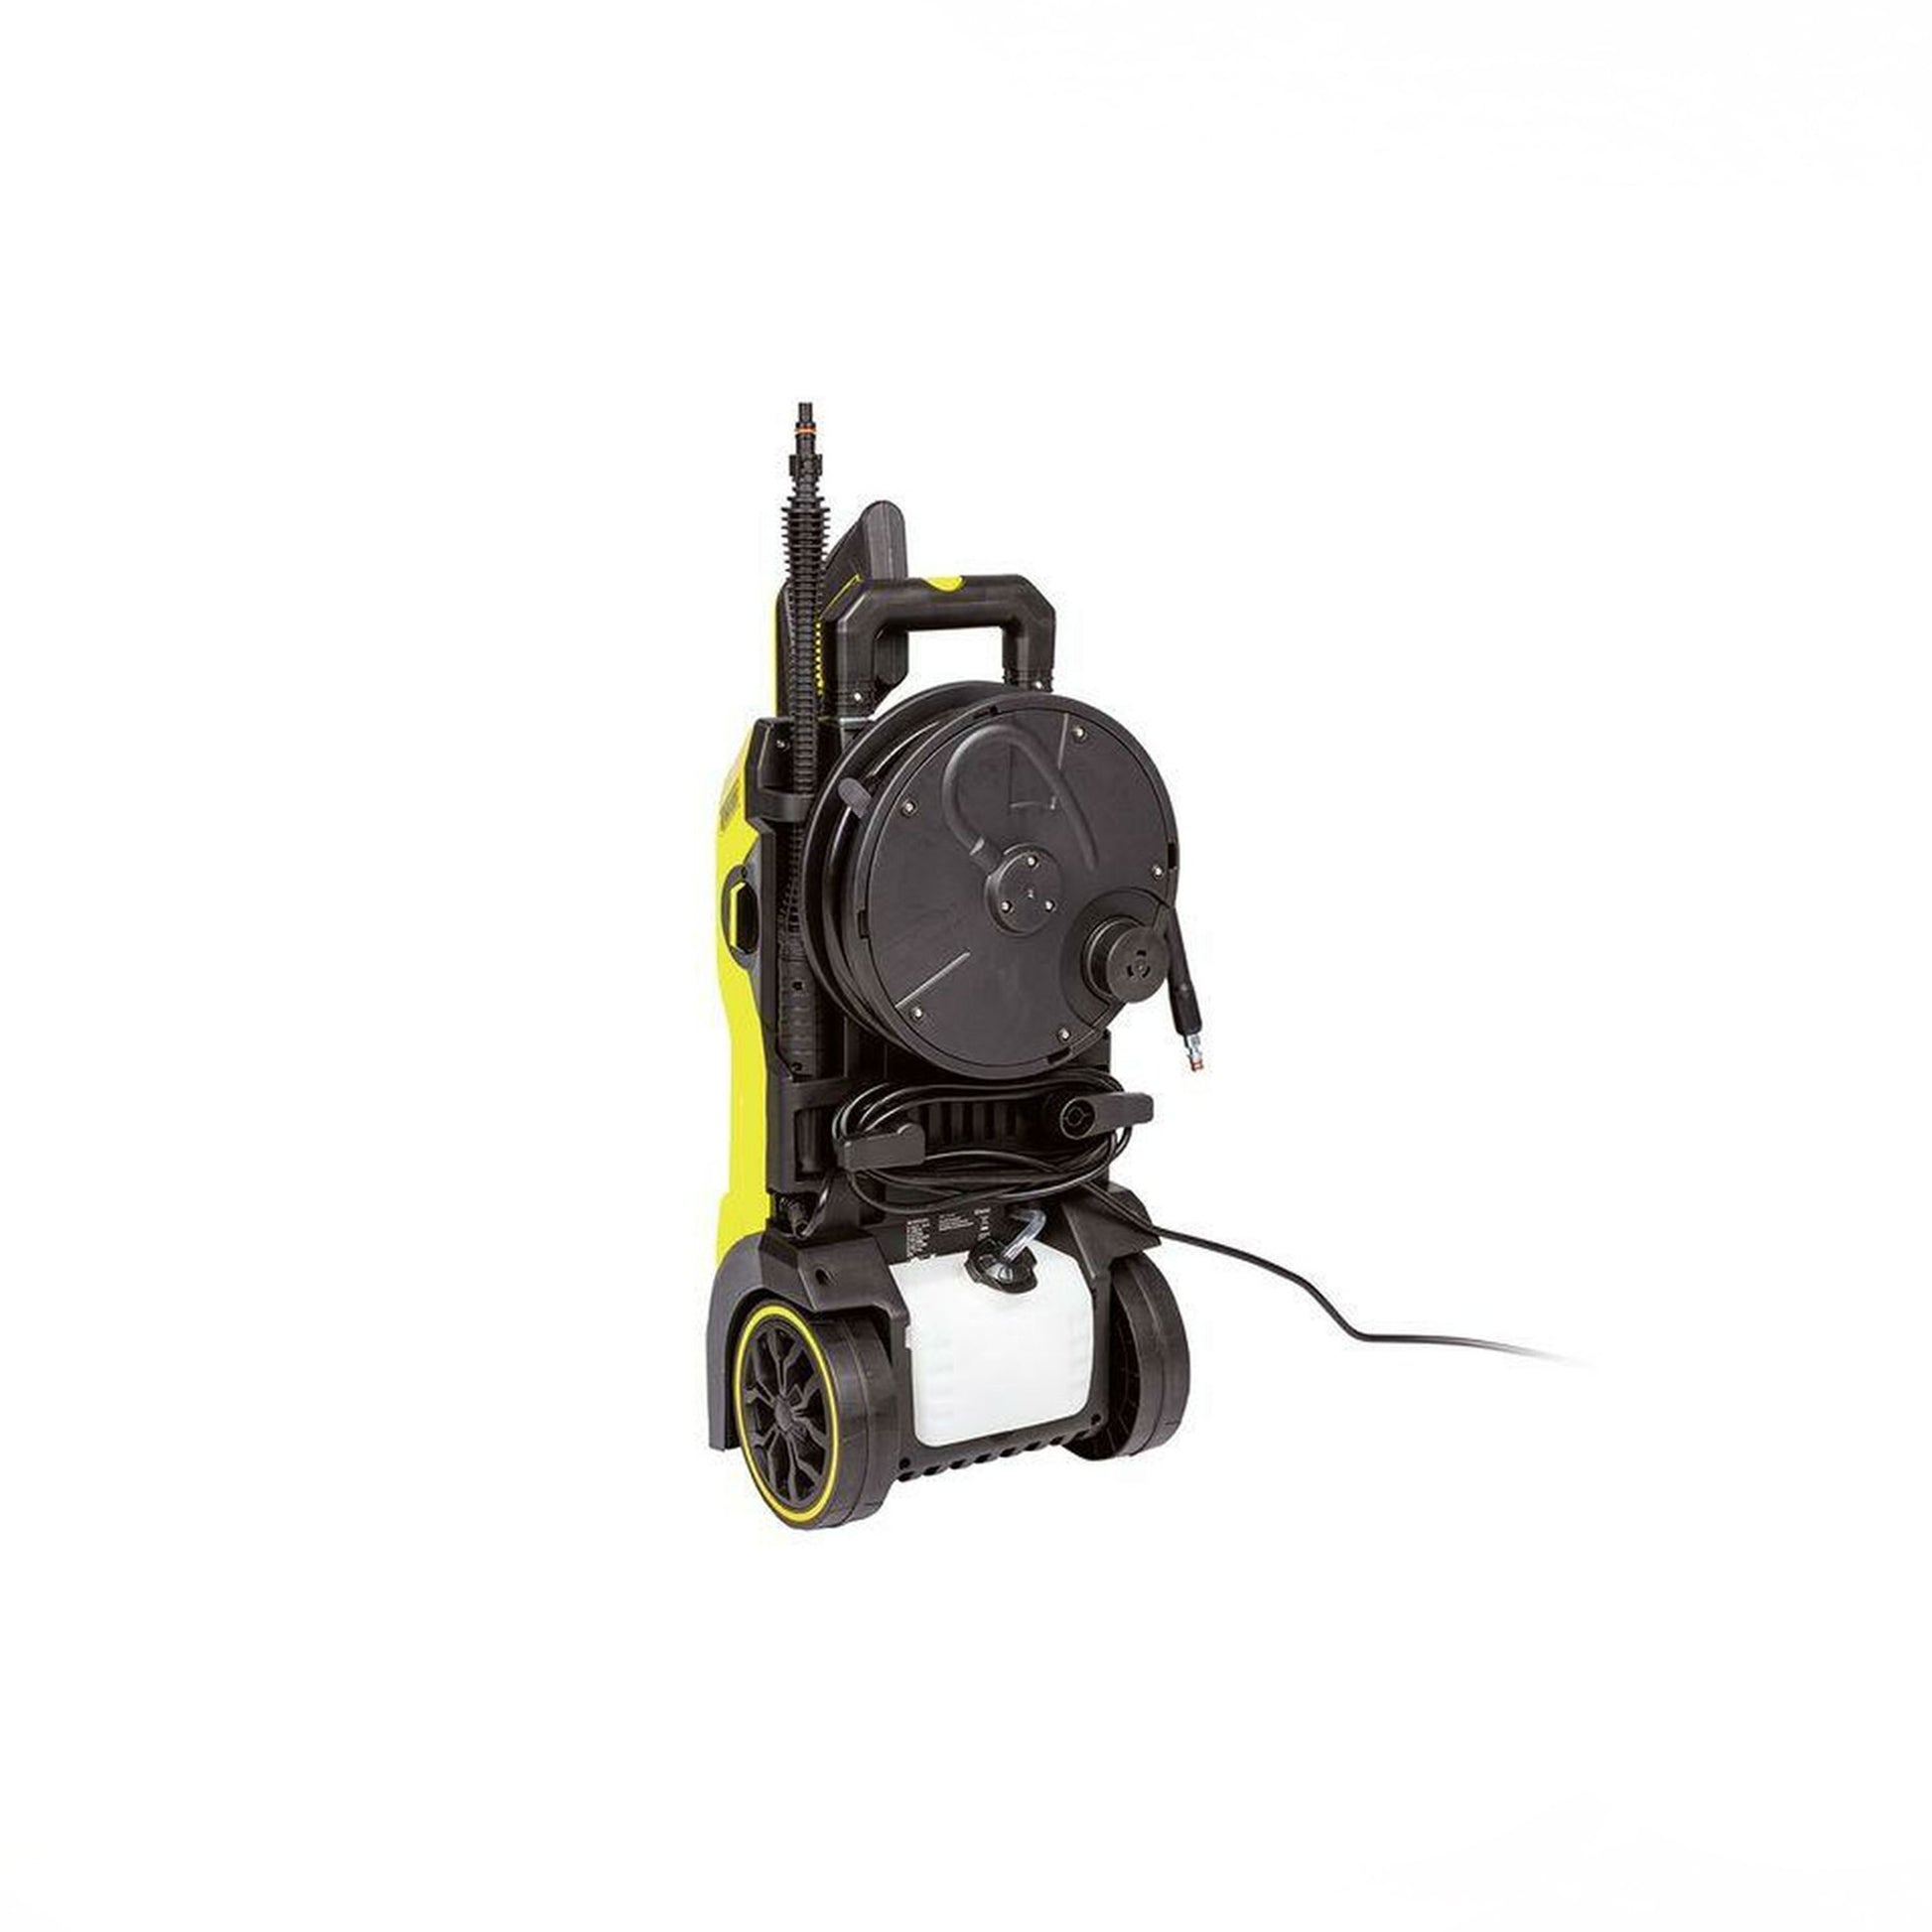 PARKSIDE® Pressure Washer PHD 170 B2, 2400 W-Royal Brands Co-